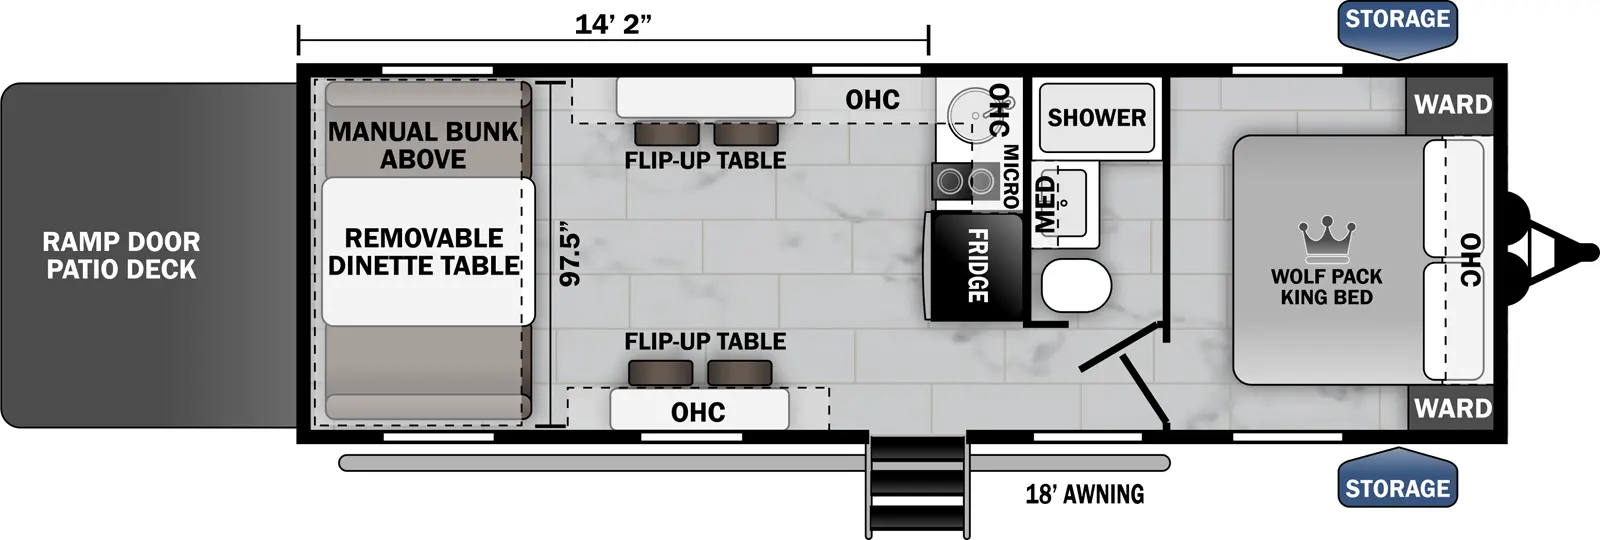 The 25-14 has zero slideouts, one entry, and a rear ramp door. Exterior features storage and a 18 foot awning. Interior layout front to back: foot-facing king bed with overhead cabinet and wardrobes on each side; off-door side full bathroom with medicine cabinet; door side entry; refrigerator, and kitchen counter with sink, cooktop, overhead cabinet, and microwave along inner wall; opposing flip-up tables with overhead cabinet and seating; rear removable dinette table with manual bunk above. Garage dimensions: 14 foot 2 inches from rear to kitchen counter; 97.5 inches from door side to off-door side.